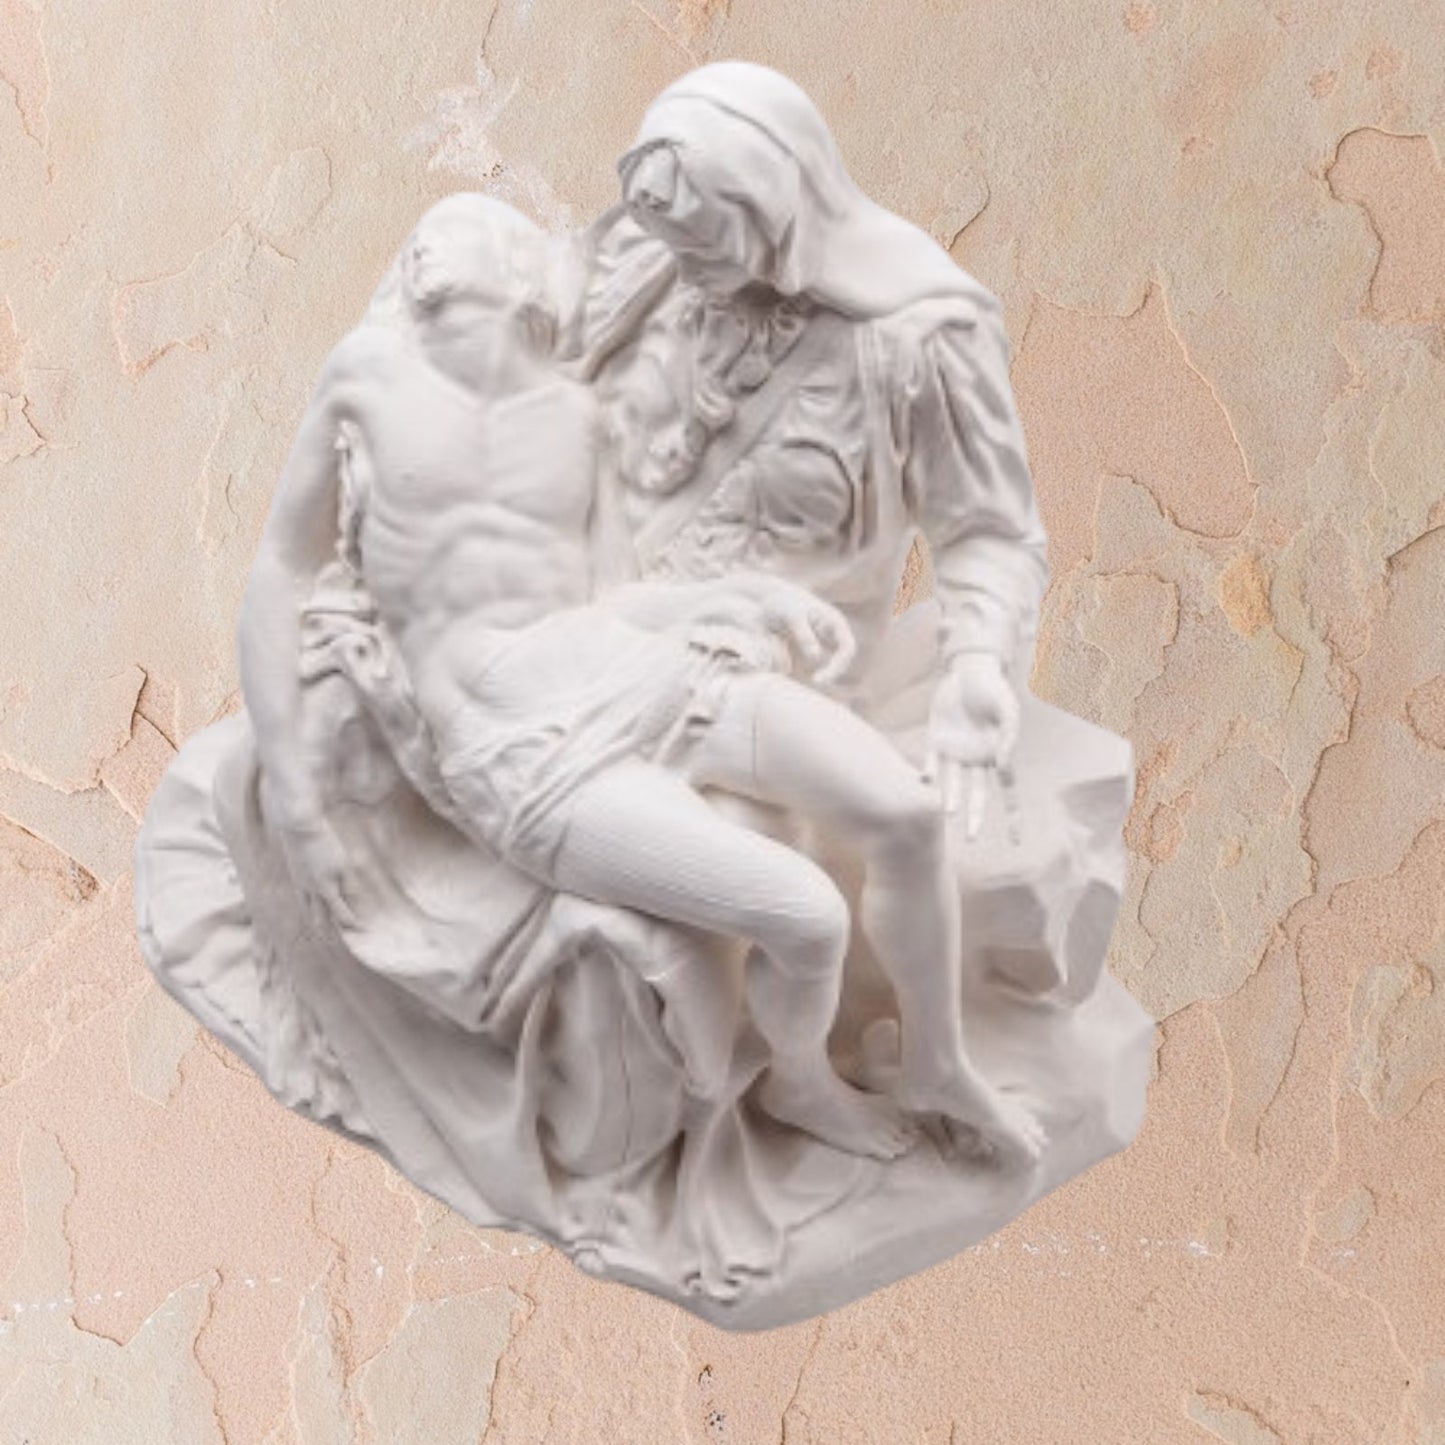 Pieta Michelangelo Mary and Jesus - Unique 3D Printed Religious Sculpture for Home Dcor or Gift